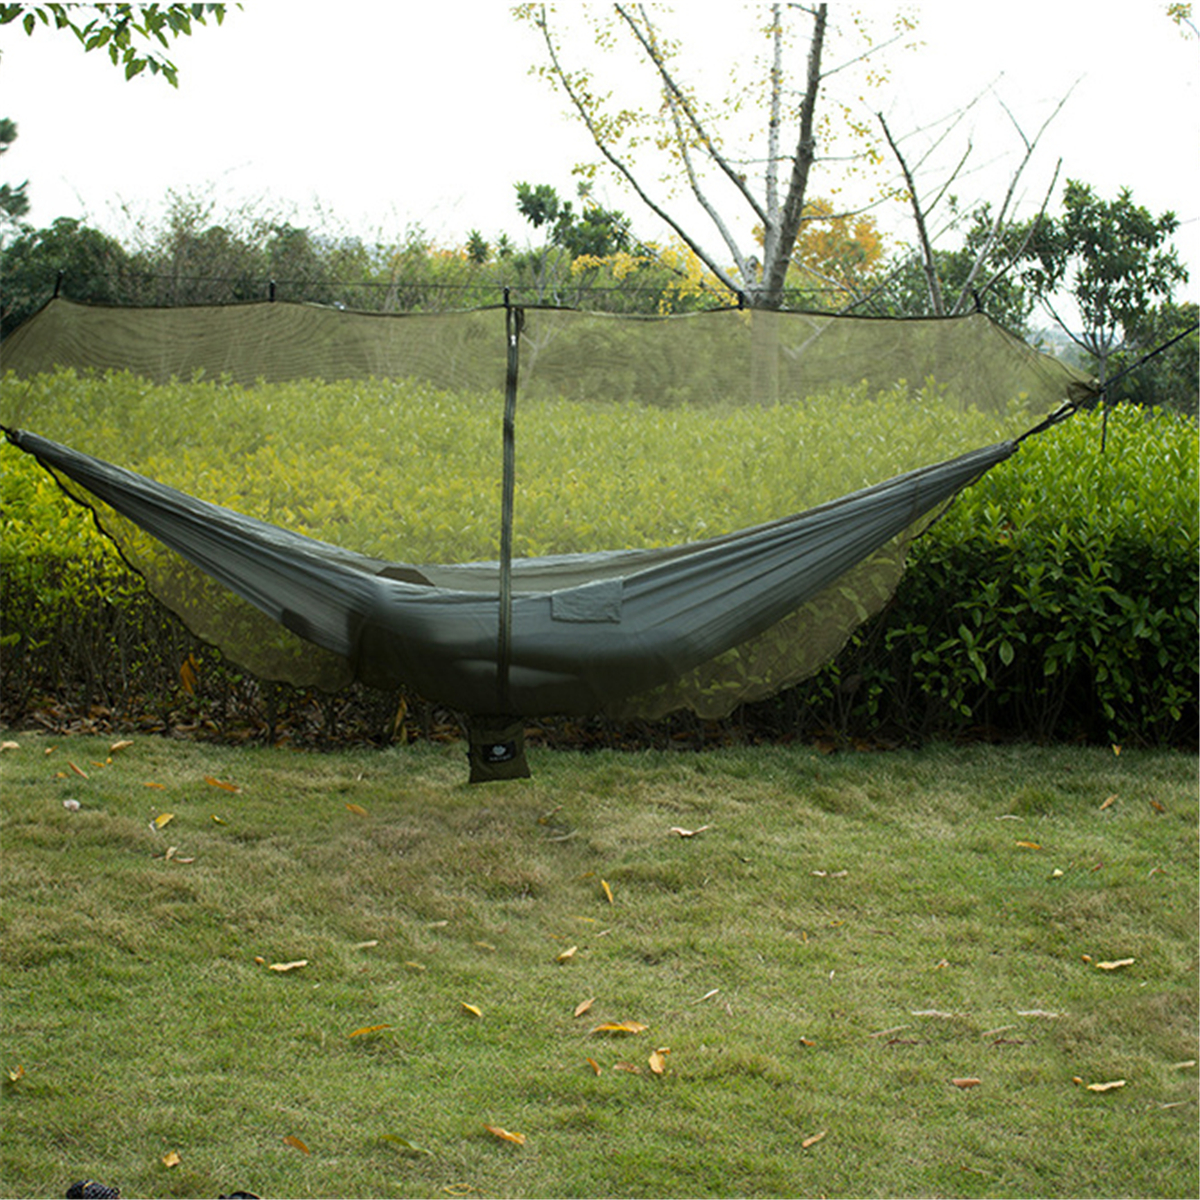 Outdoor-Portable-Hammock-Mosquito-Insect-Net-Camping-Swing-Bed-Gauze-Protection-1336853-8